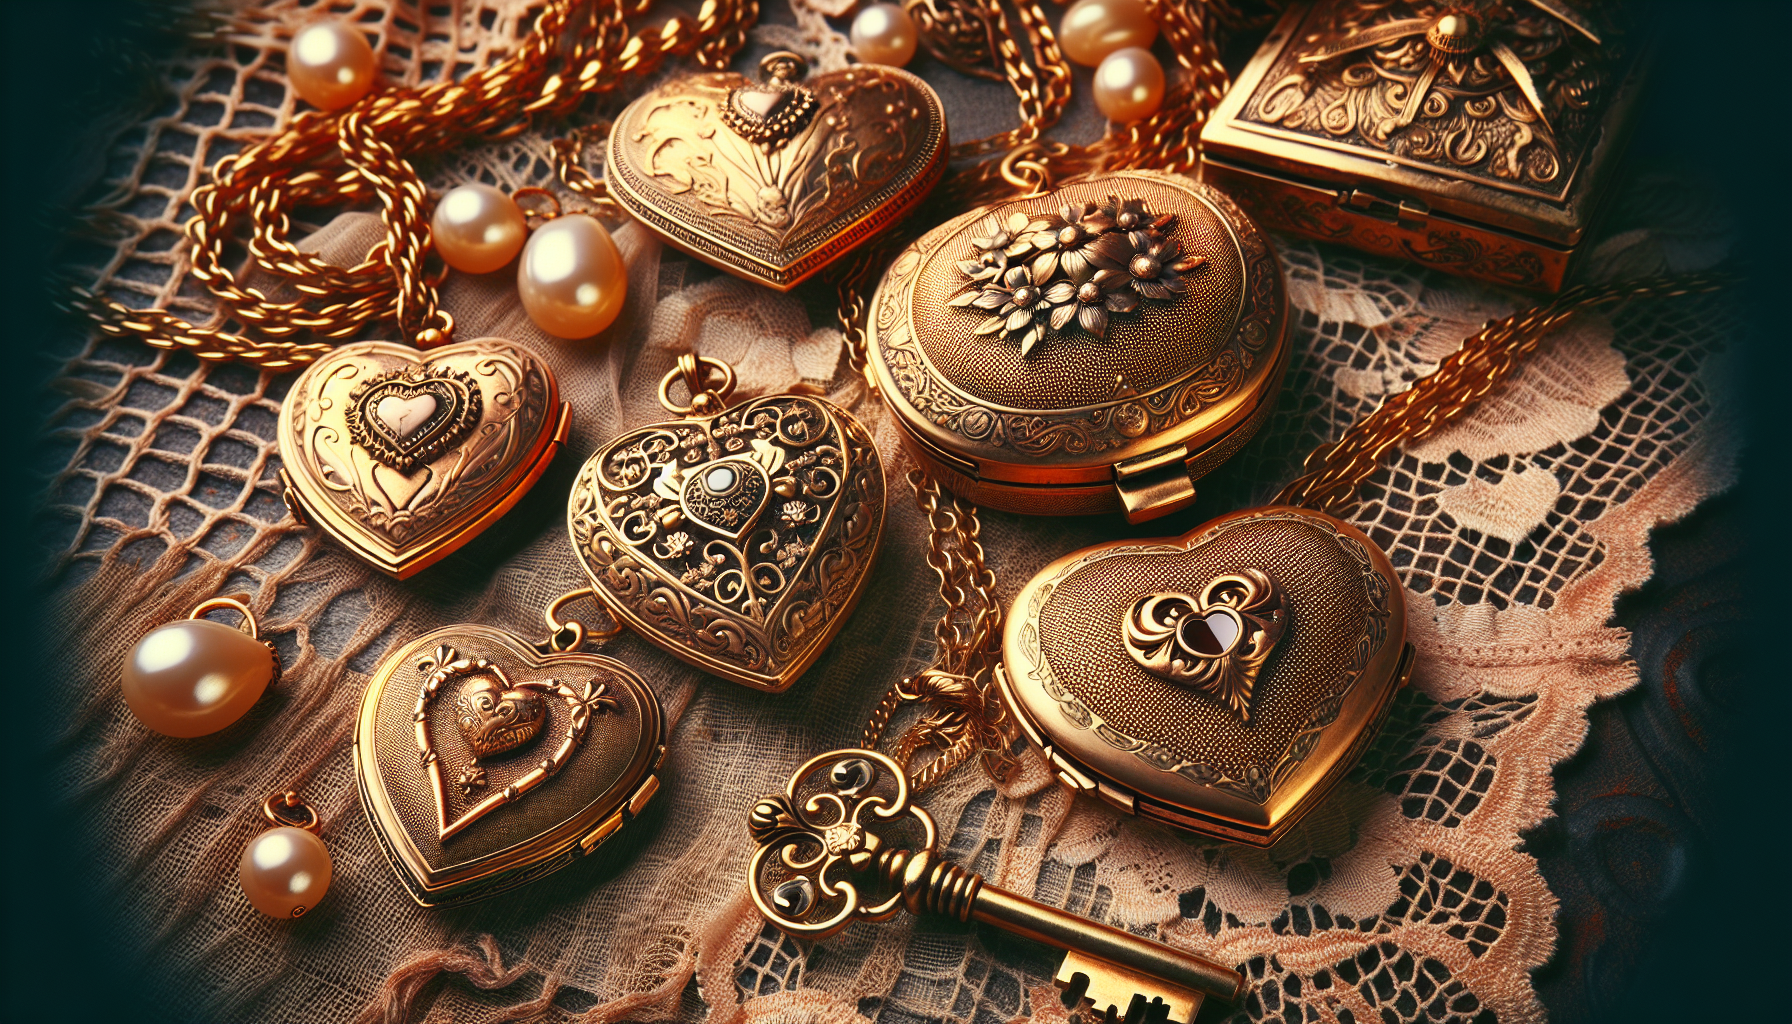 Depict a captivating scene of olden days charm with an emphasis on love. It should showcase items of antique jewelry, particularly golden heart-shaped lockets. They might be lying against a backdrop o